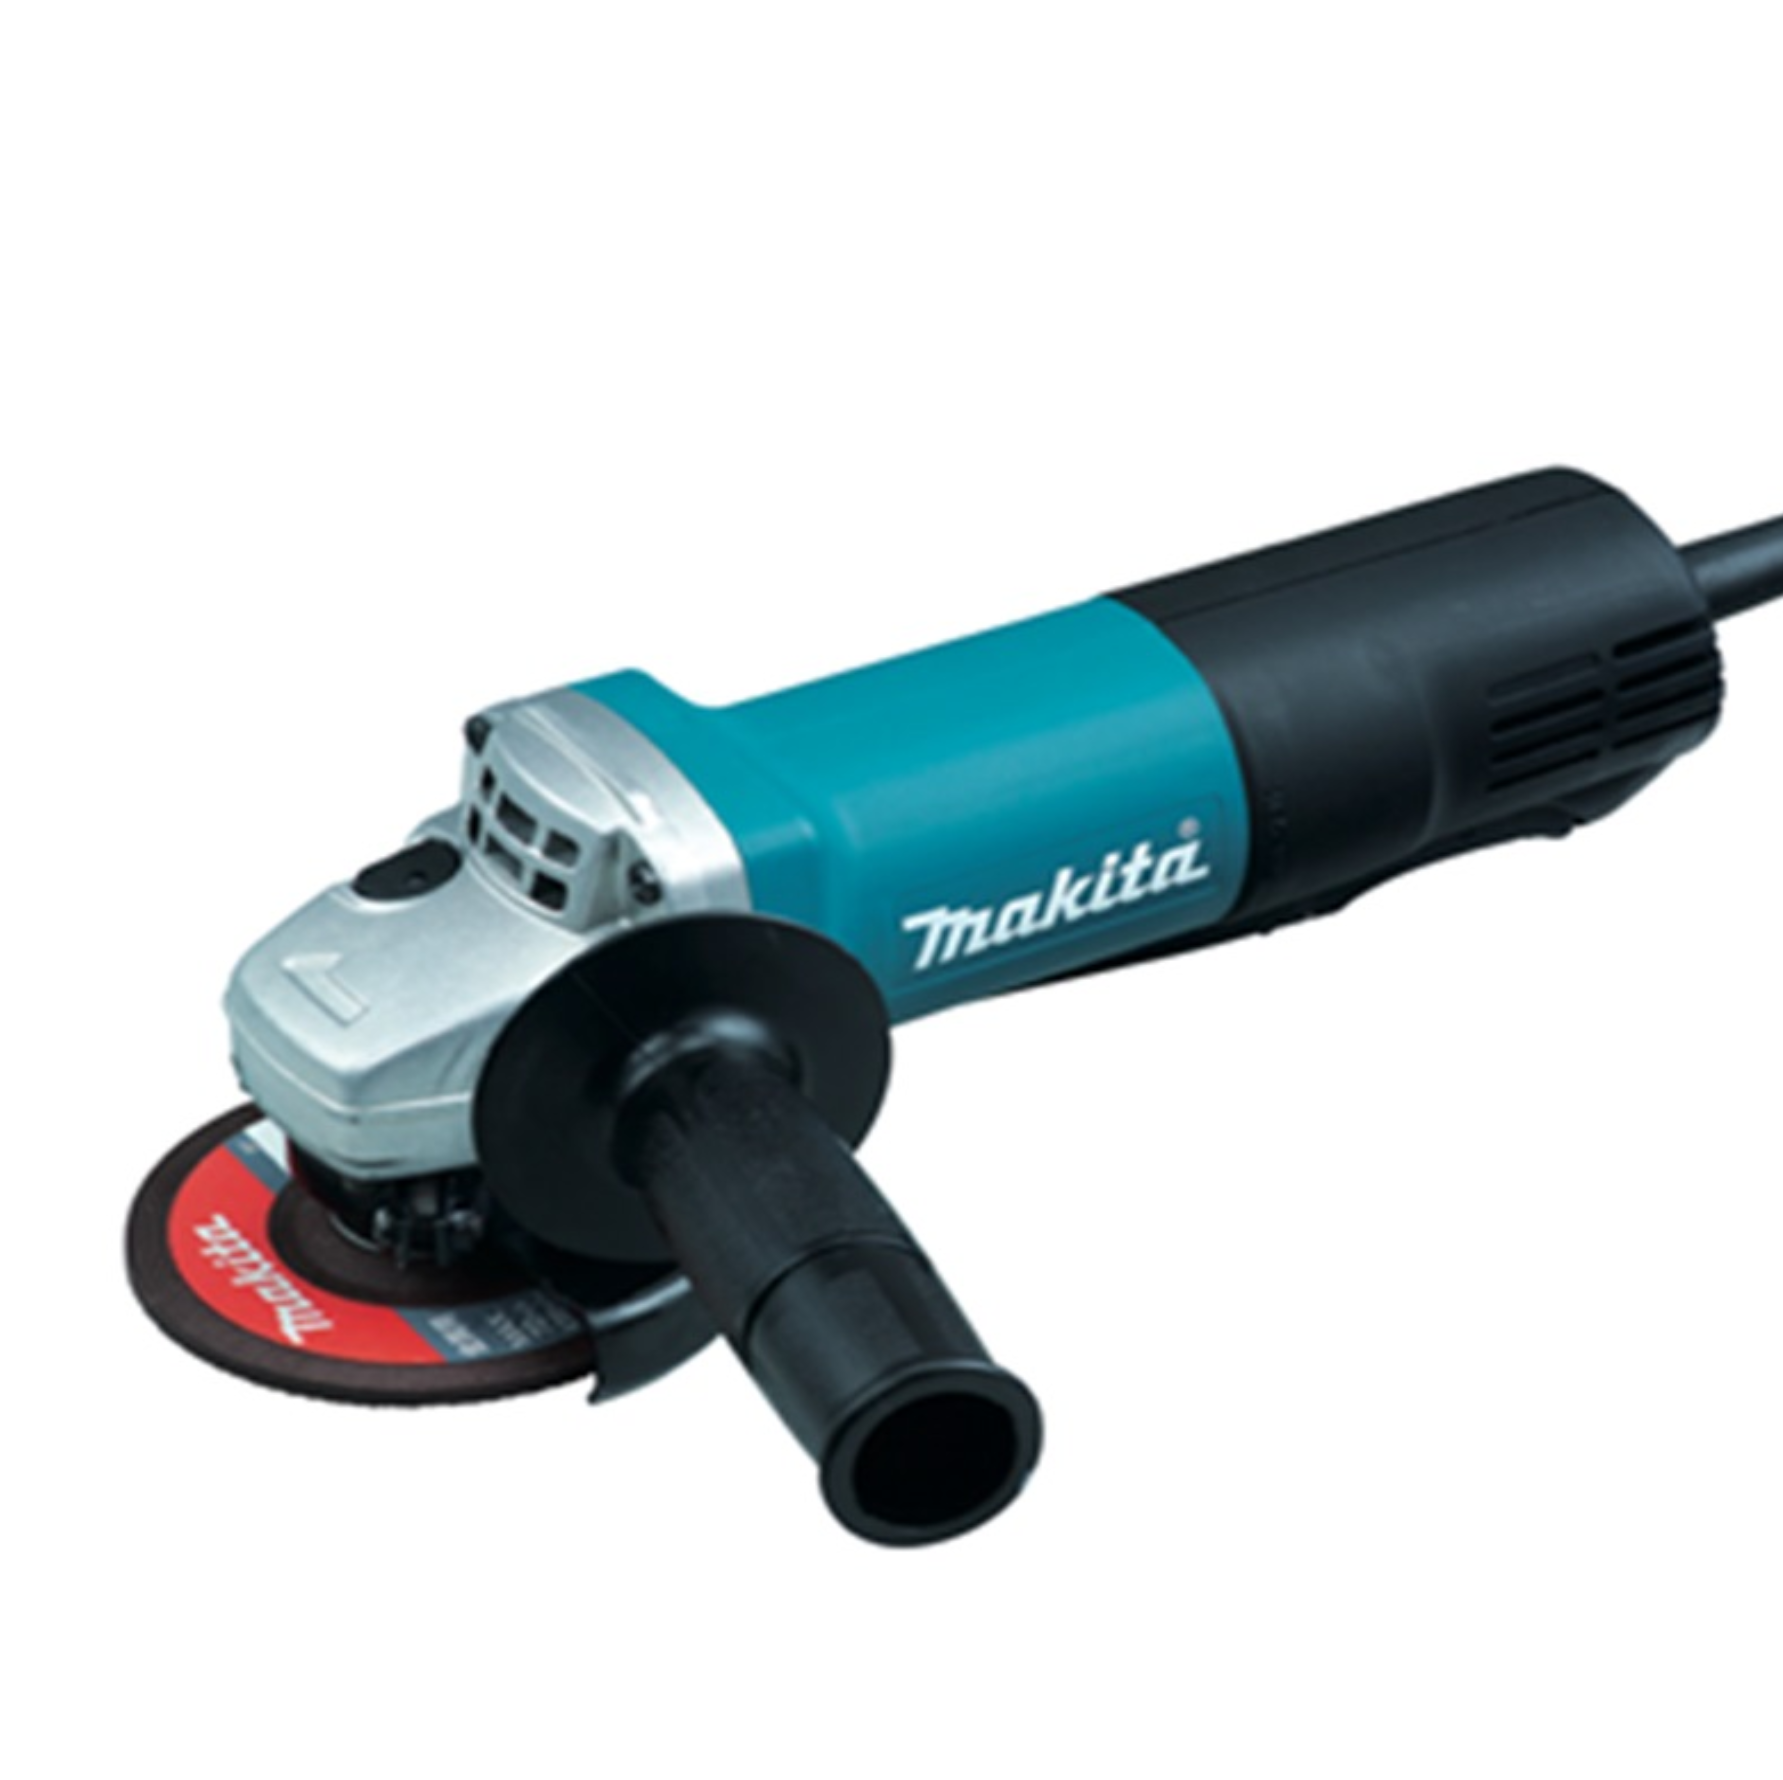 Makita 9556HPG 4"/100MM PADDLE SWITCH Angle Grinder